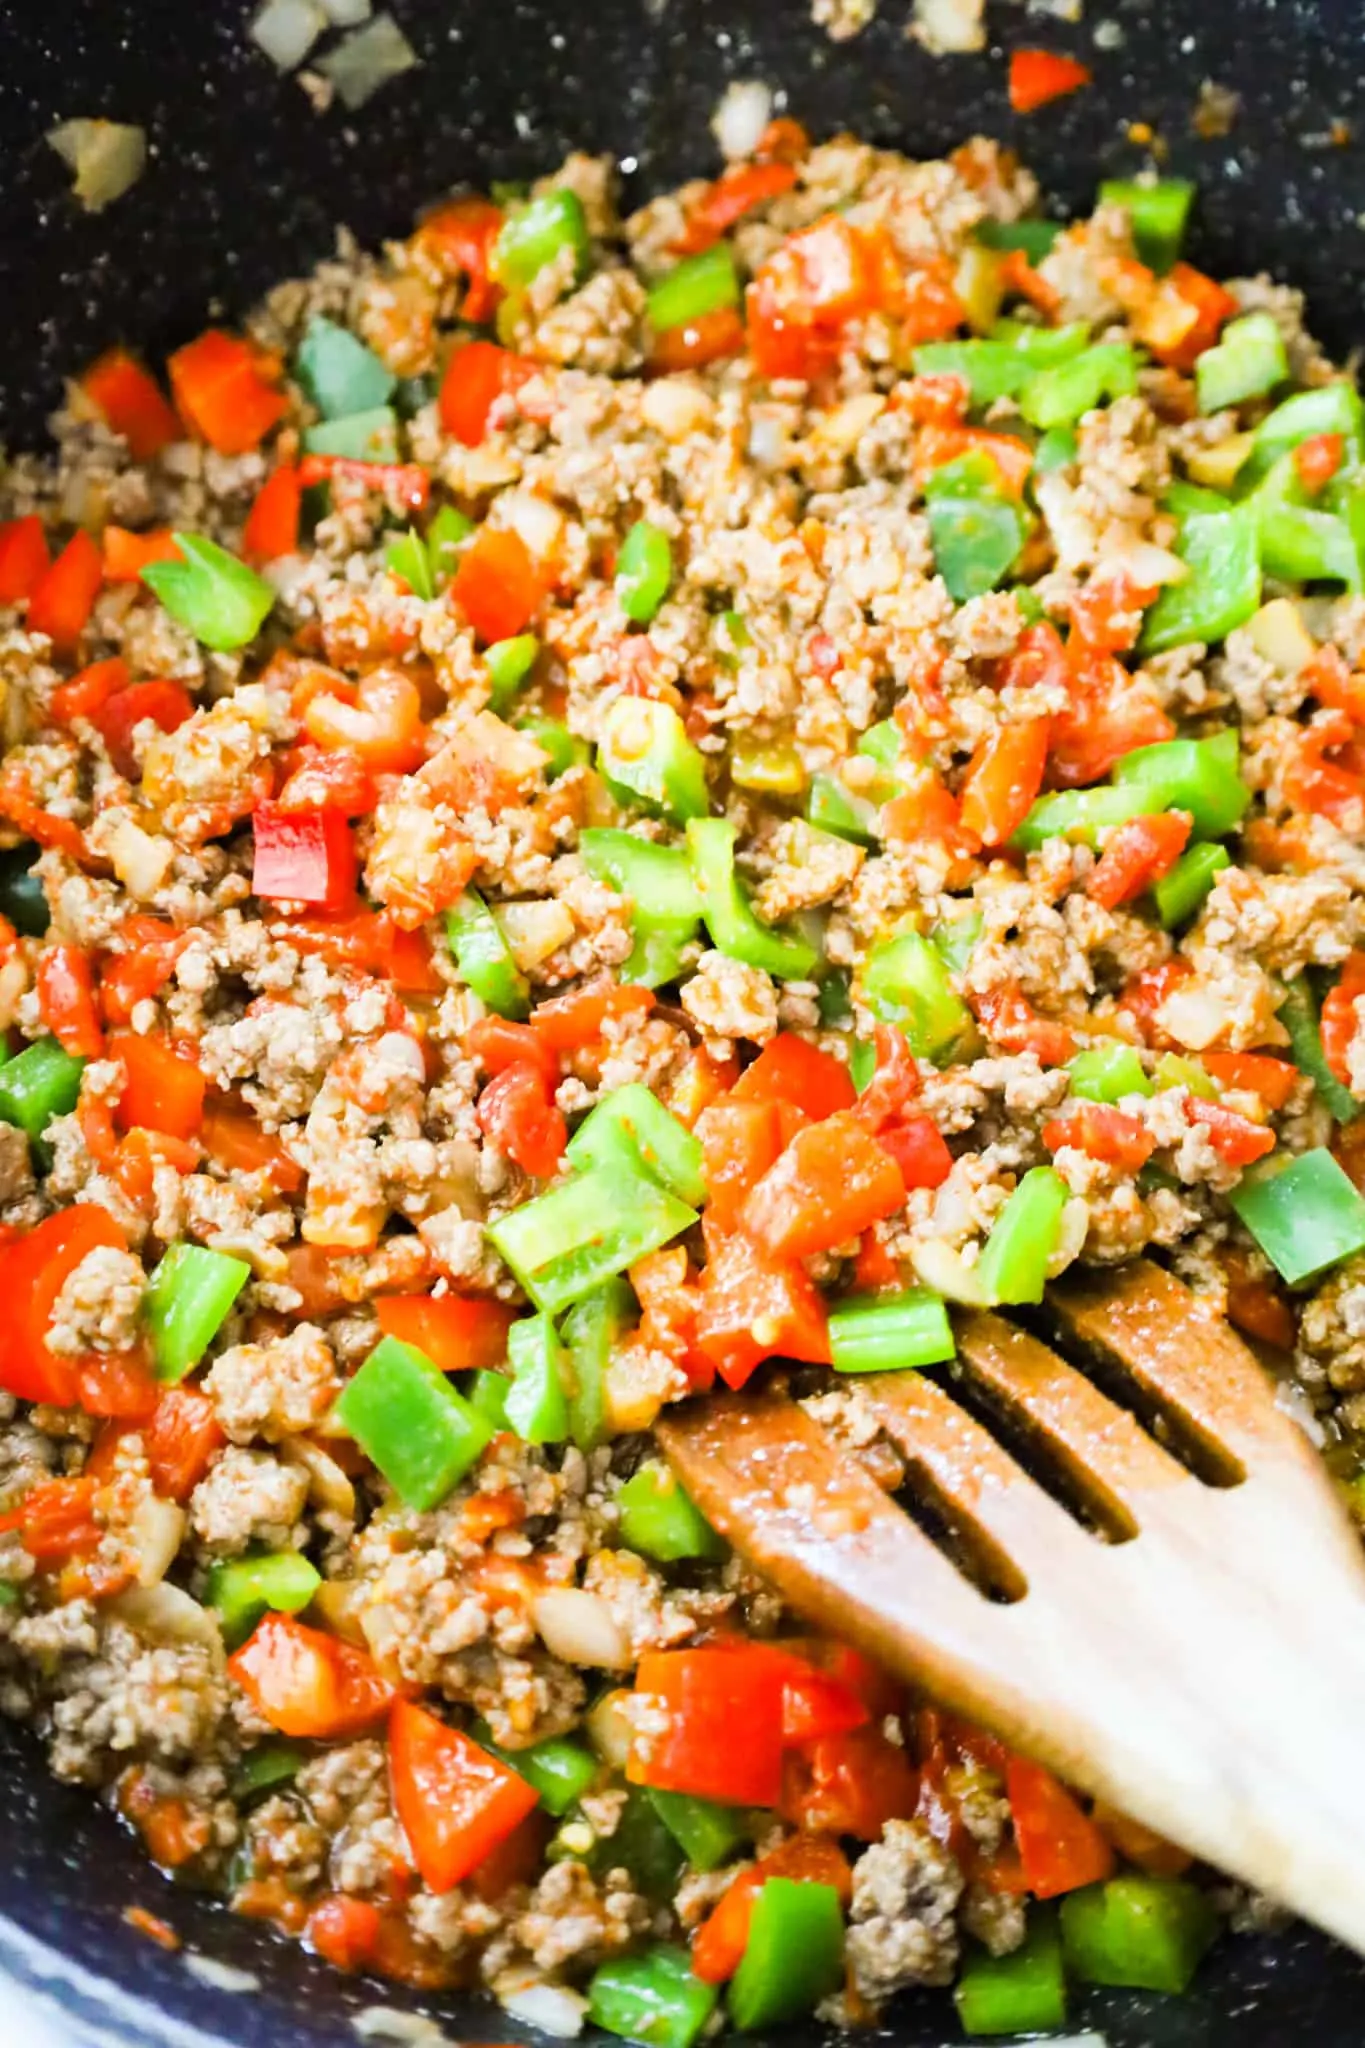 ground beef and diced peppers coated in taco seasoning